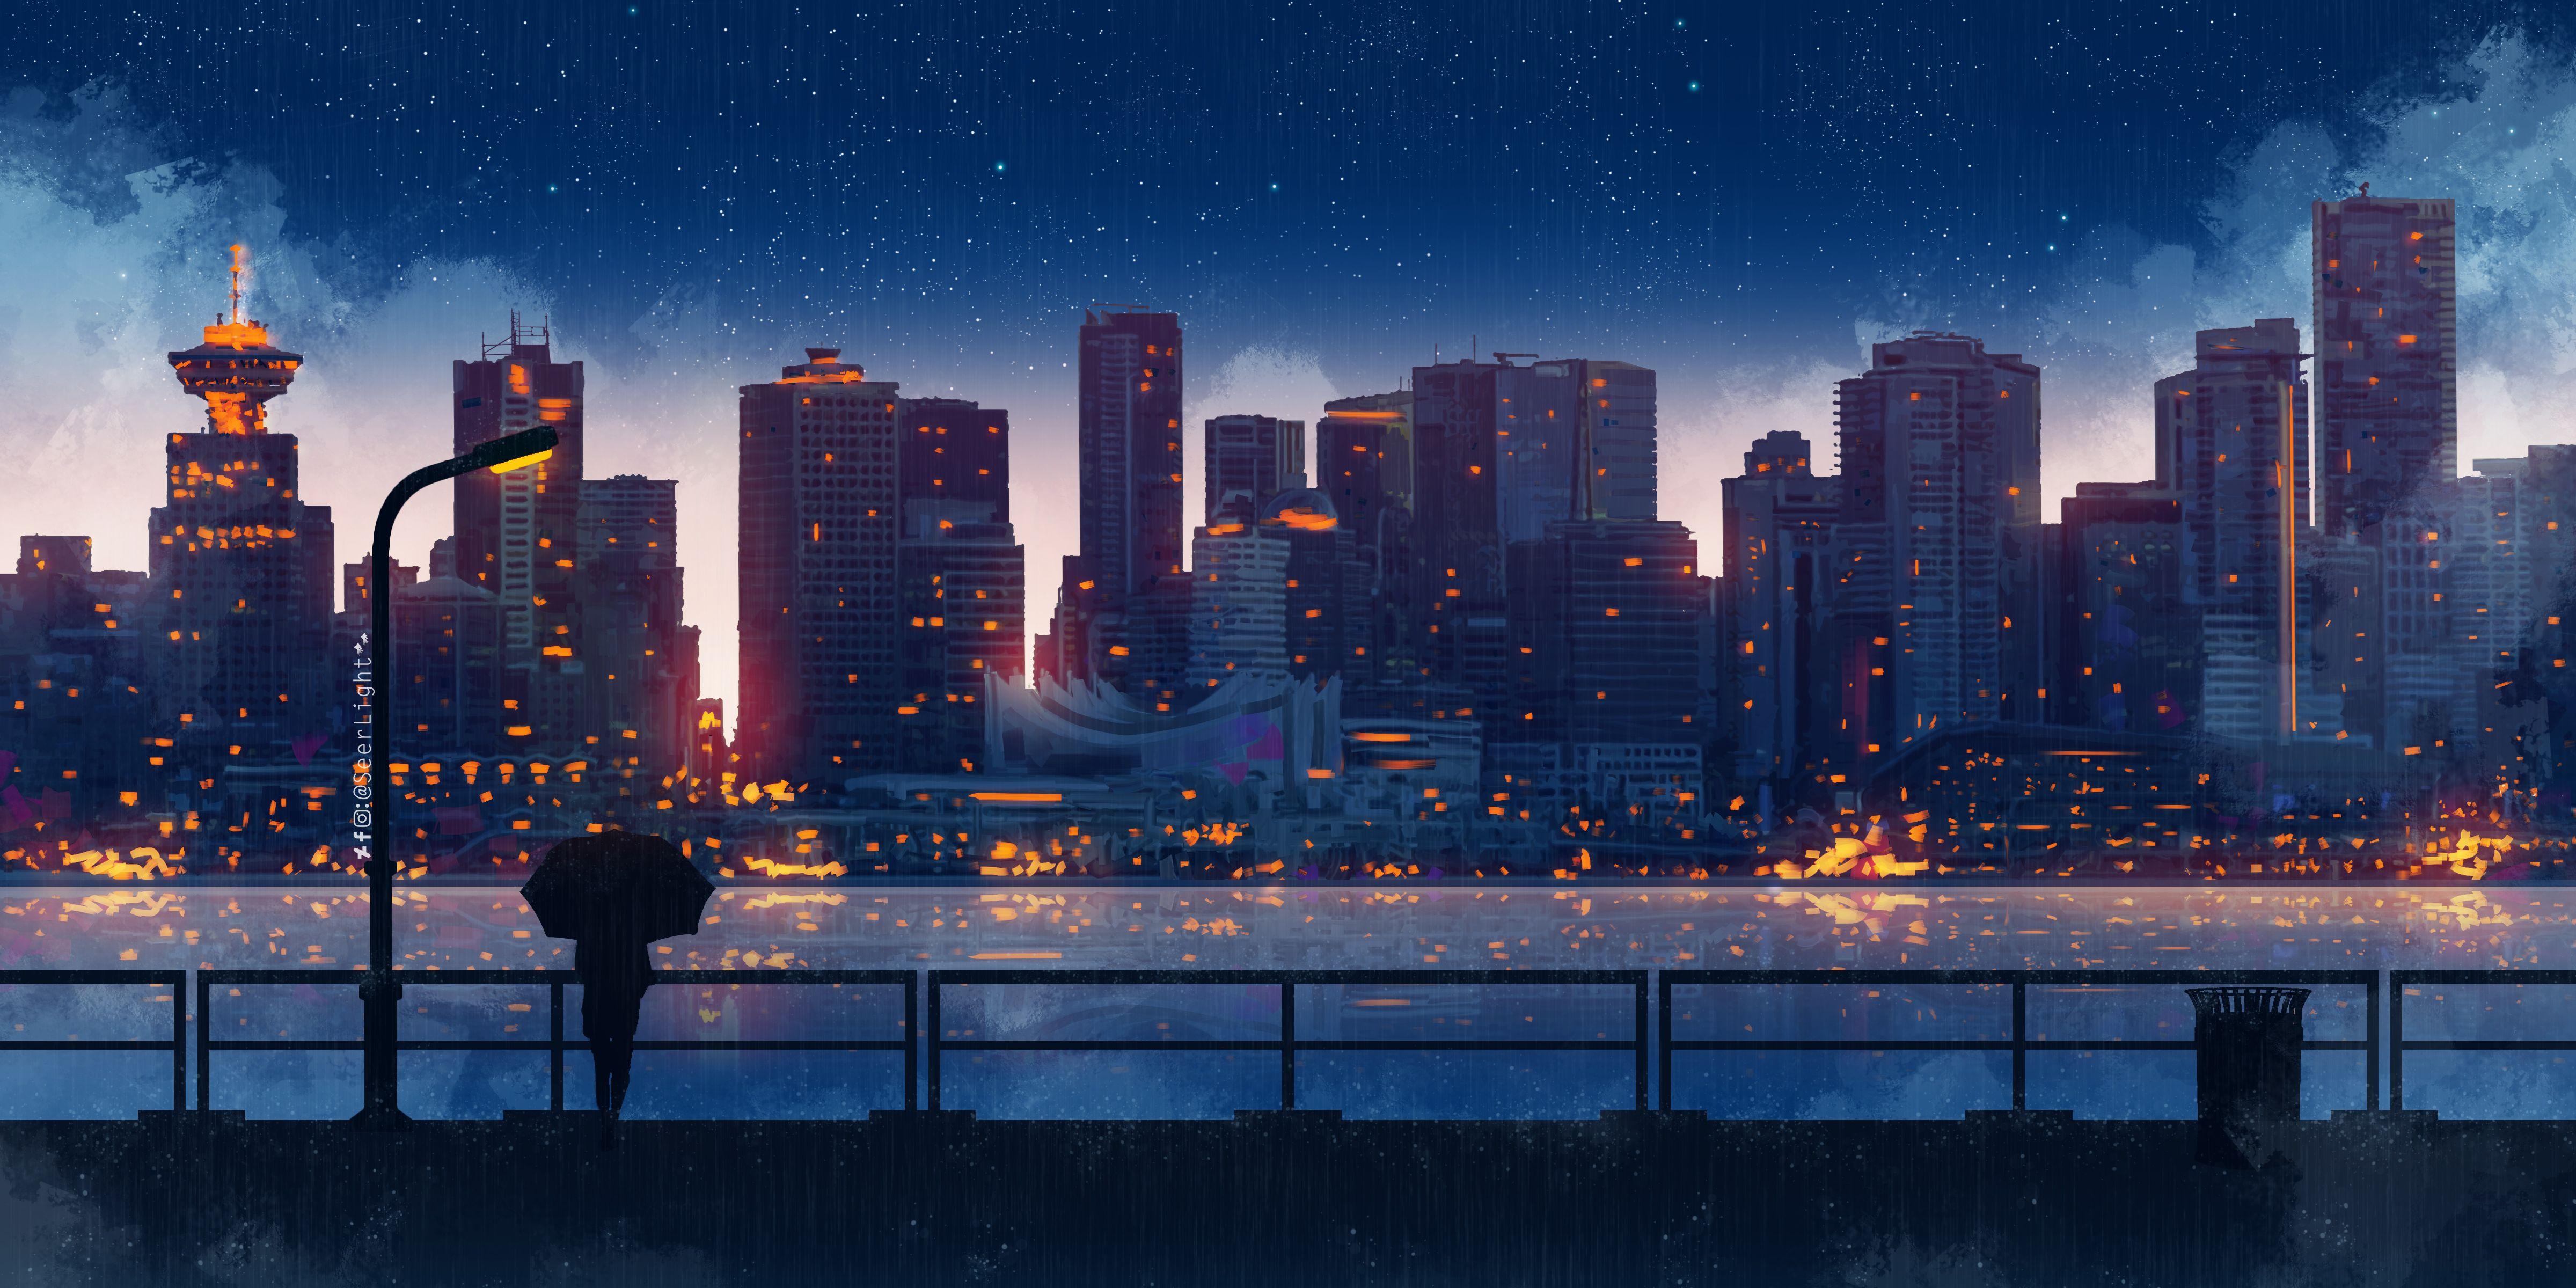 Anime Night City Wallpapers - Top Free Anime Night City Backgrounds